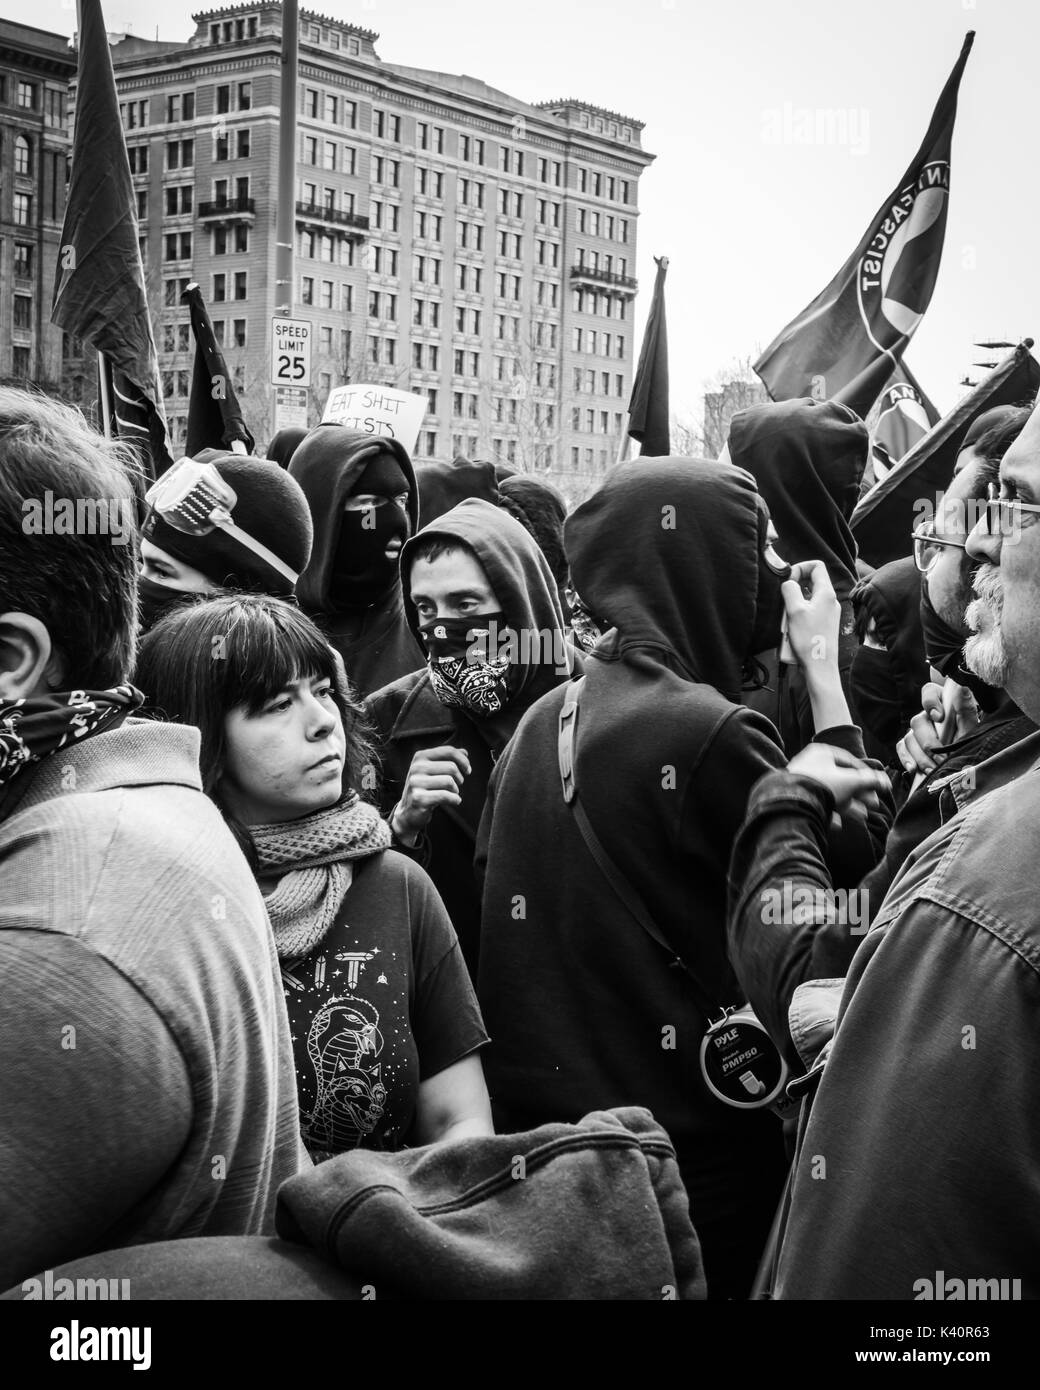 Hundreds of Antifascist protesters take over Downtown Philadelphia to rout a group of White Nationalists at Pro-Trump rally in late March, 2017. Stock Photo